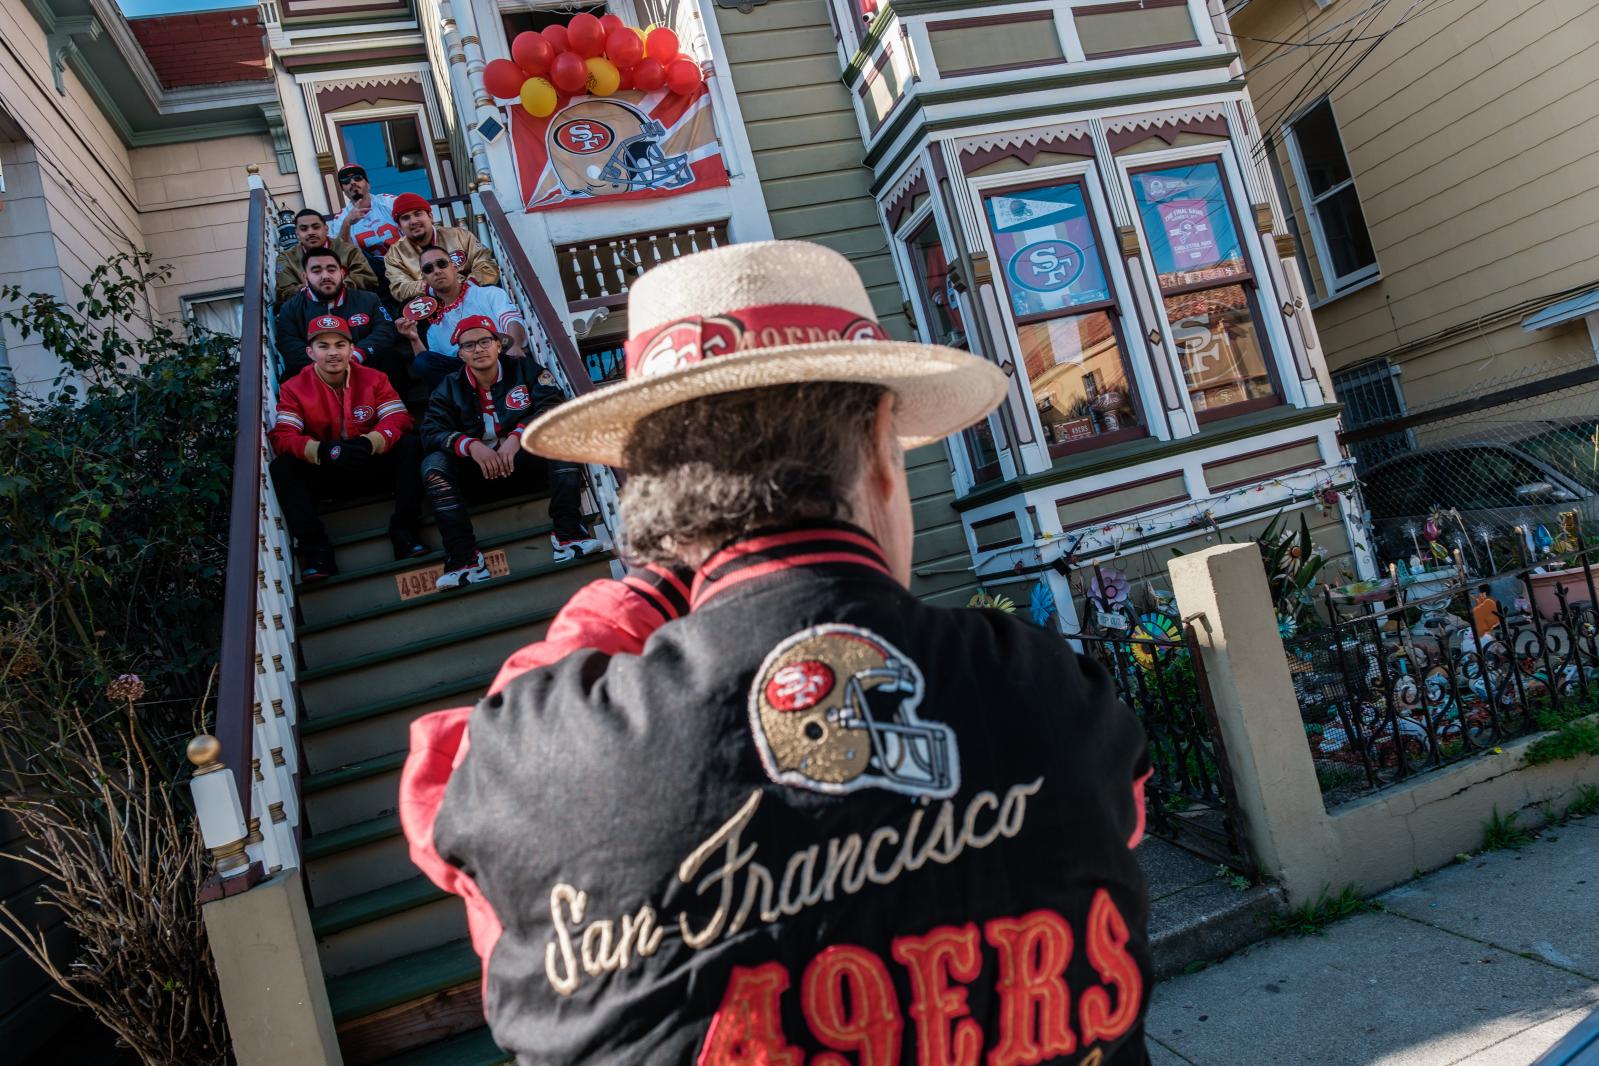 Image from A Scarlet and Gold Neighborhood - A man takes photographs of his neighbors on the steps of...